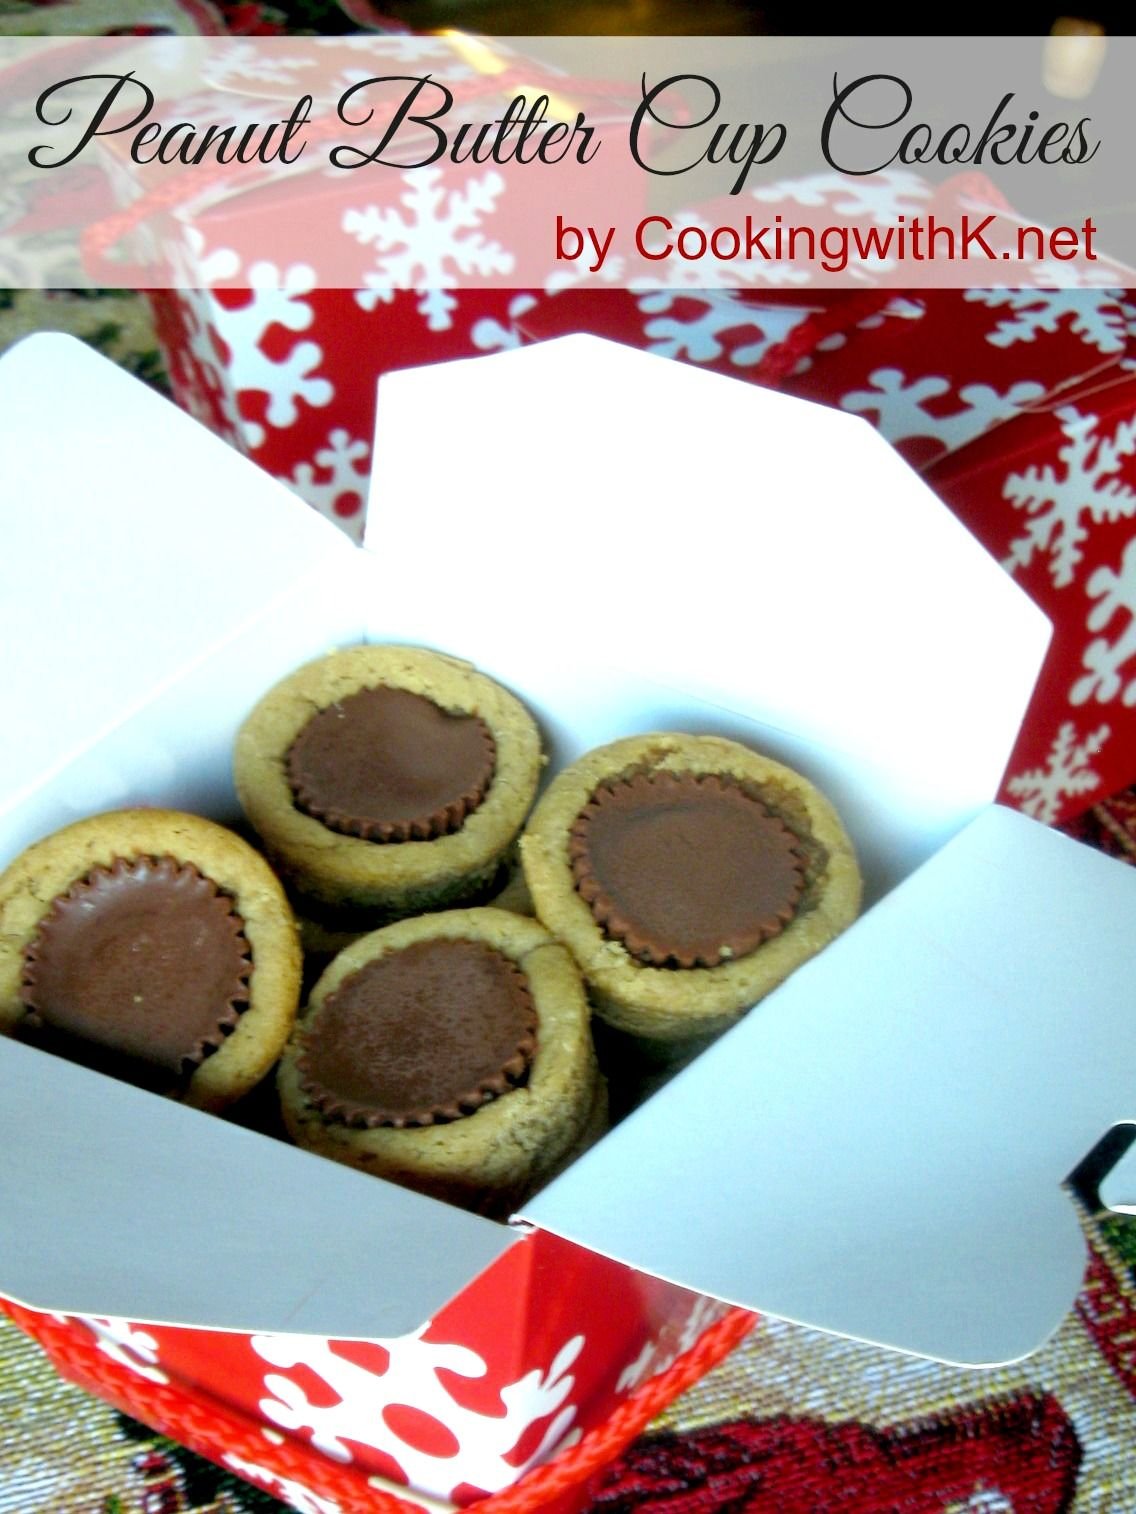 Reese's Peanut Butter Cup Cookies Using Pillsbury Refrigerated